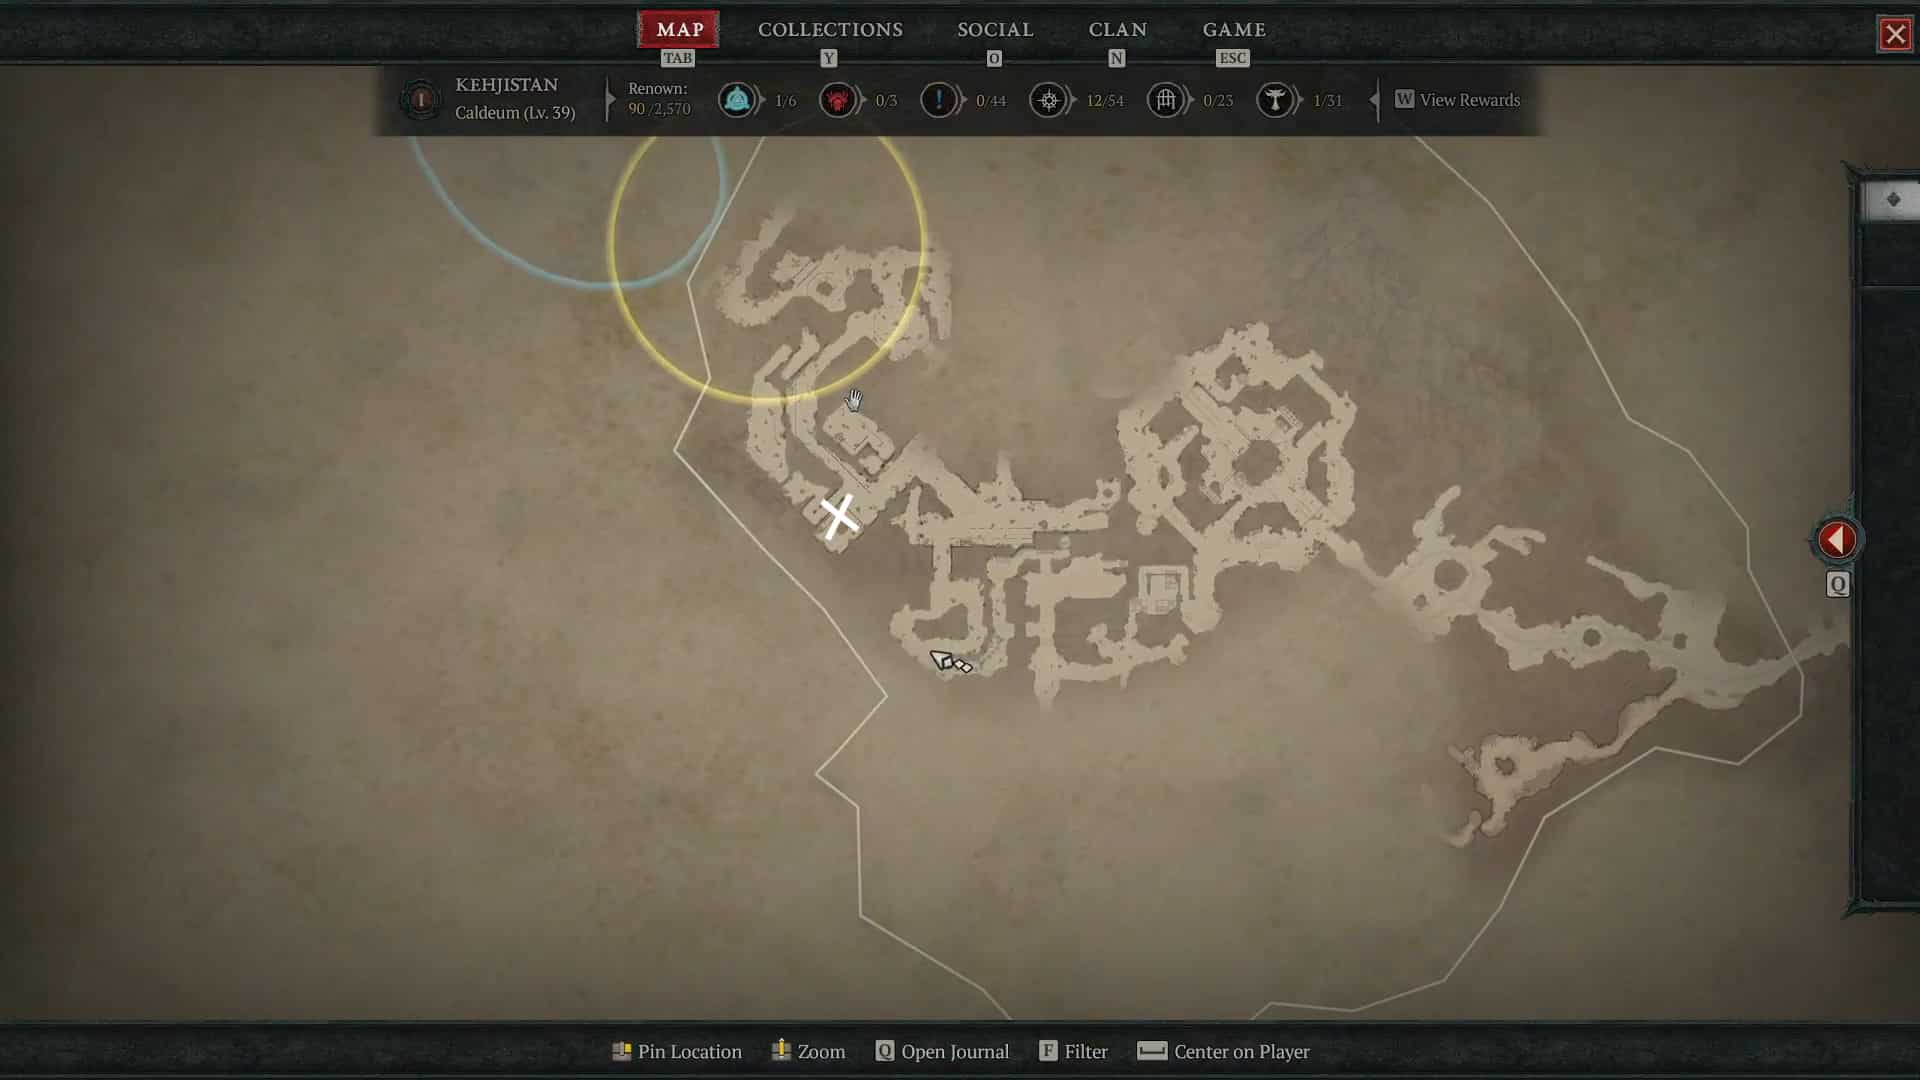 Diablo 4 Silent Chest locations: An image with the marked Silent Chest in Kehjistan.